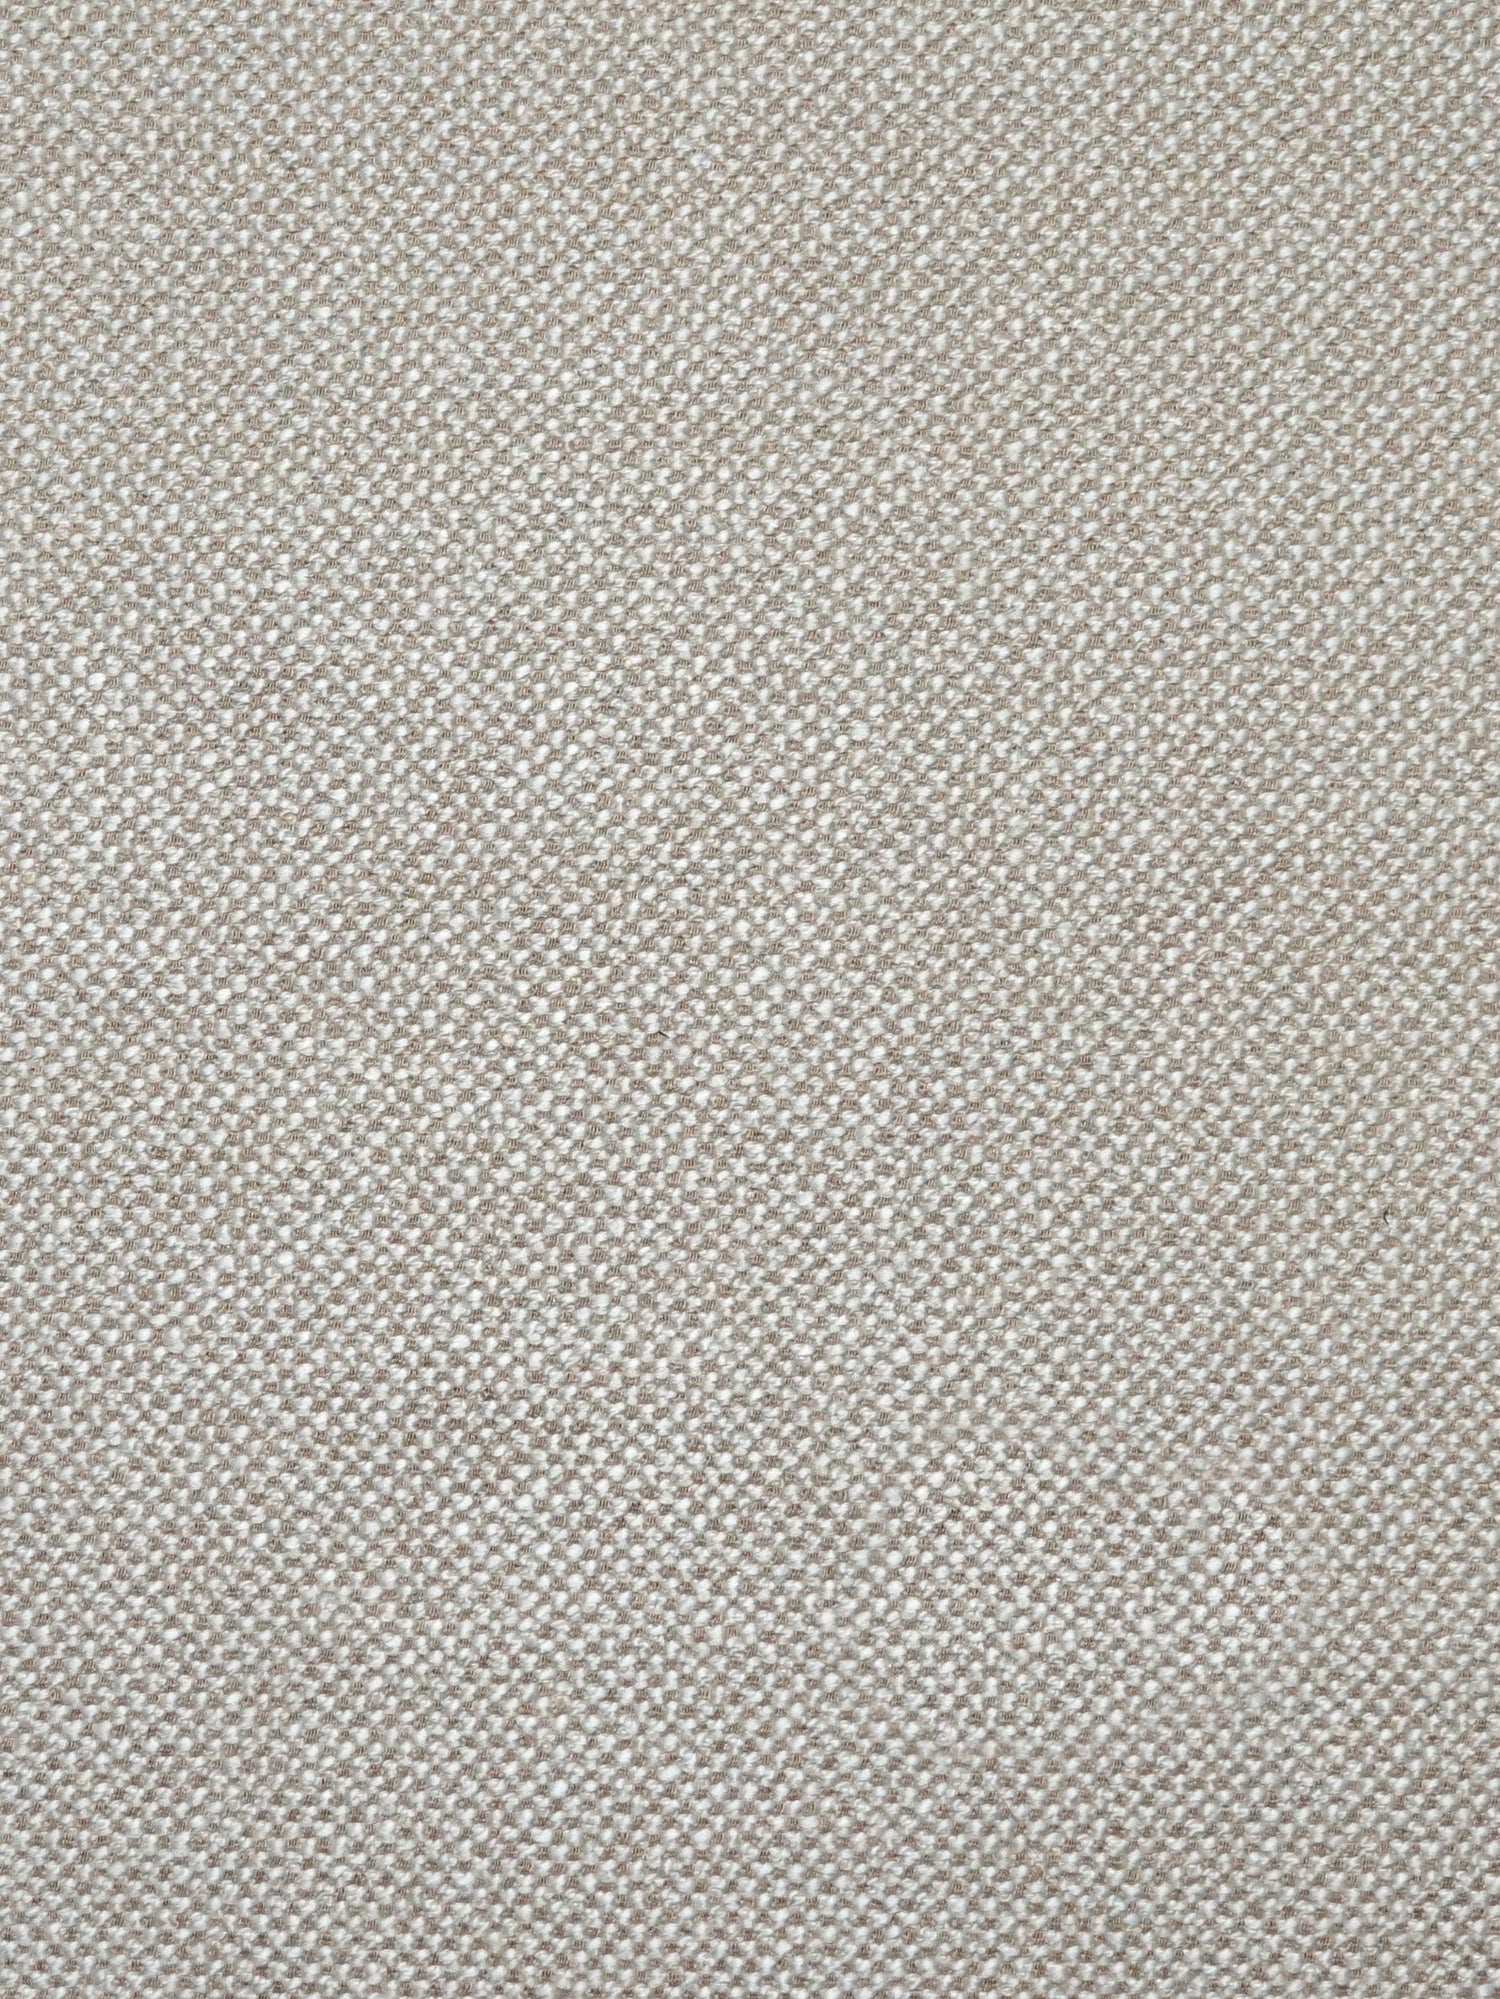 City Tweed fabric in toasted oat color - pattern number SC 000127249 - by Scalamandre in the Scalamandre Fabrics Book 1 collection